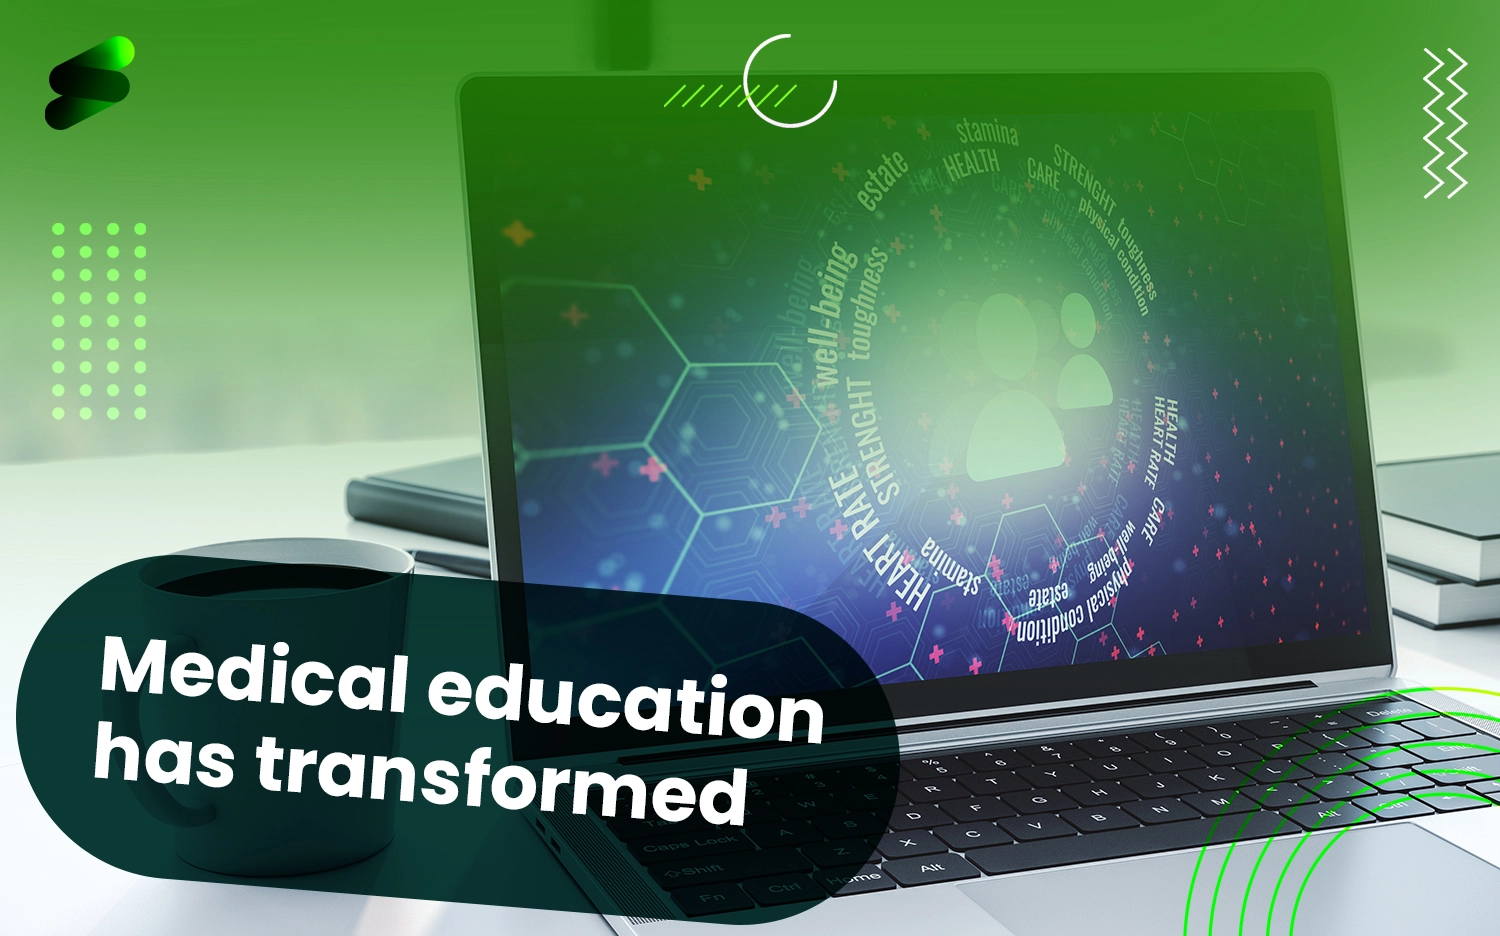 Medical education has transformed over the years